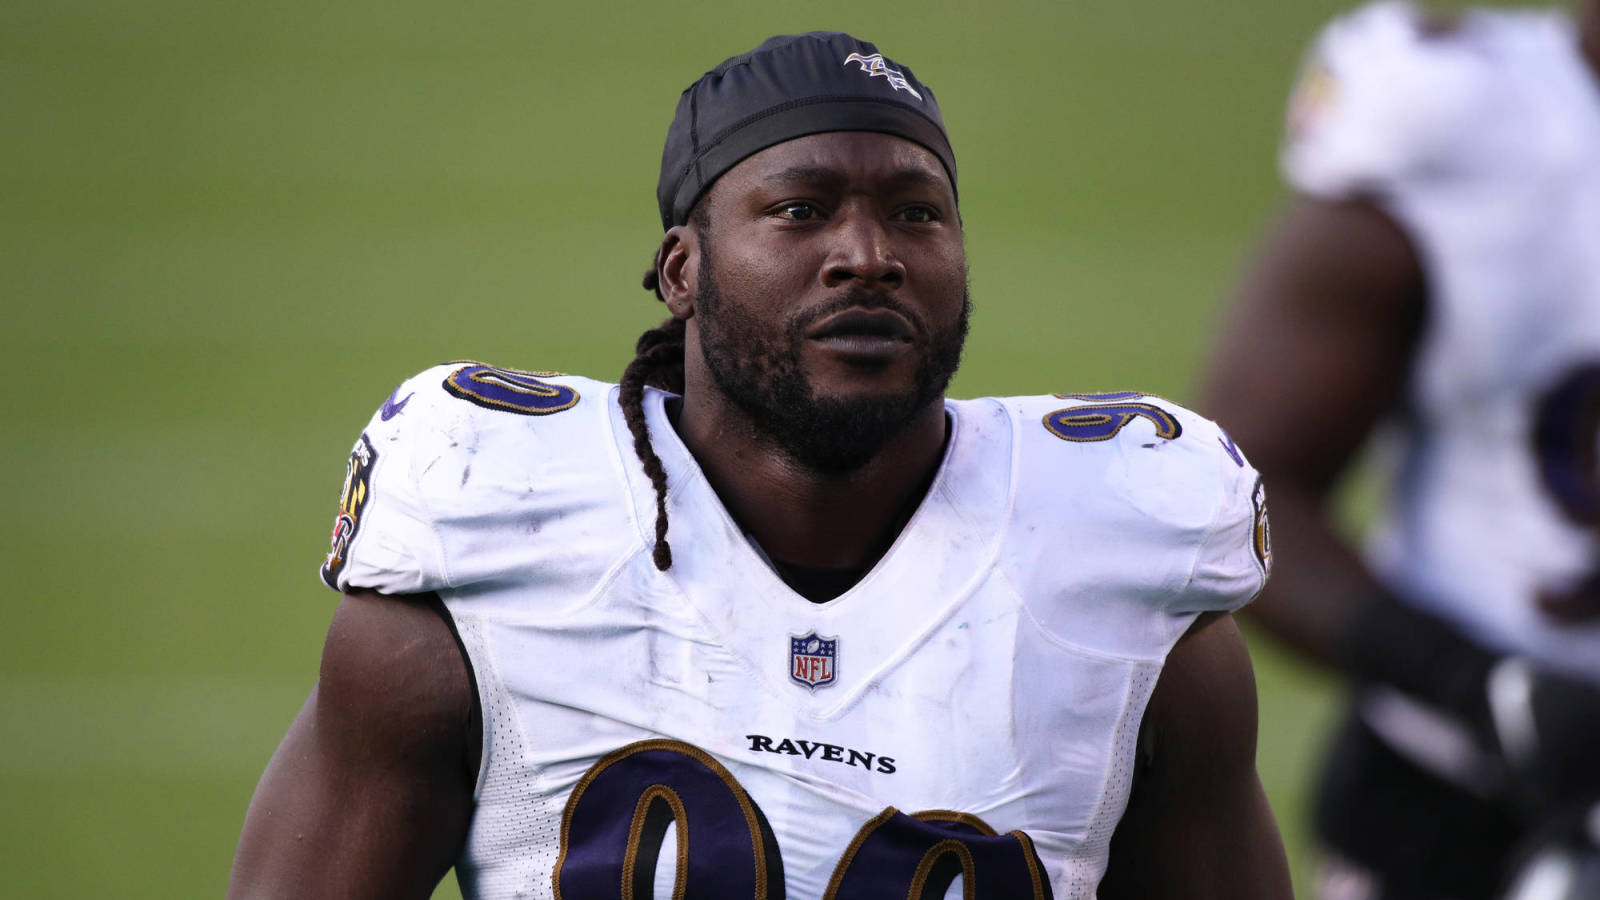 LB Pernell McPhee wants to stay with Ravens